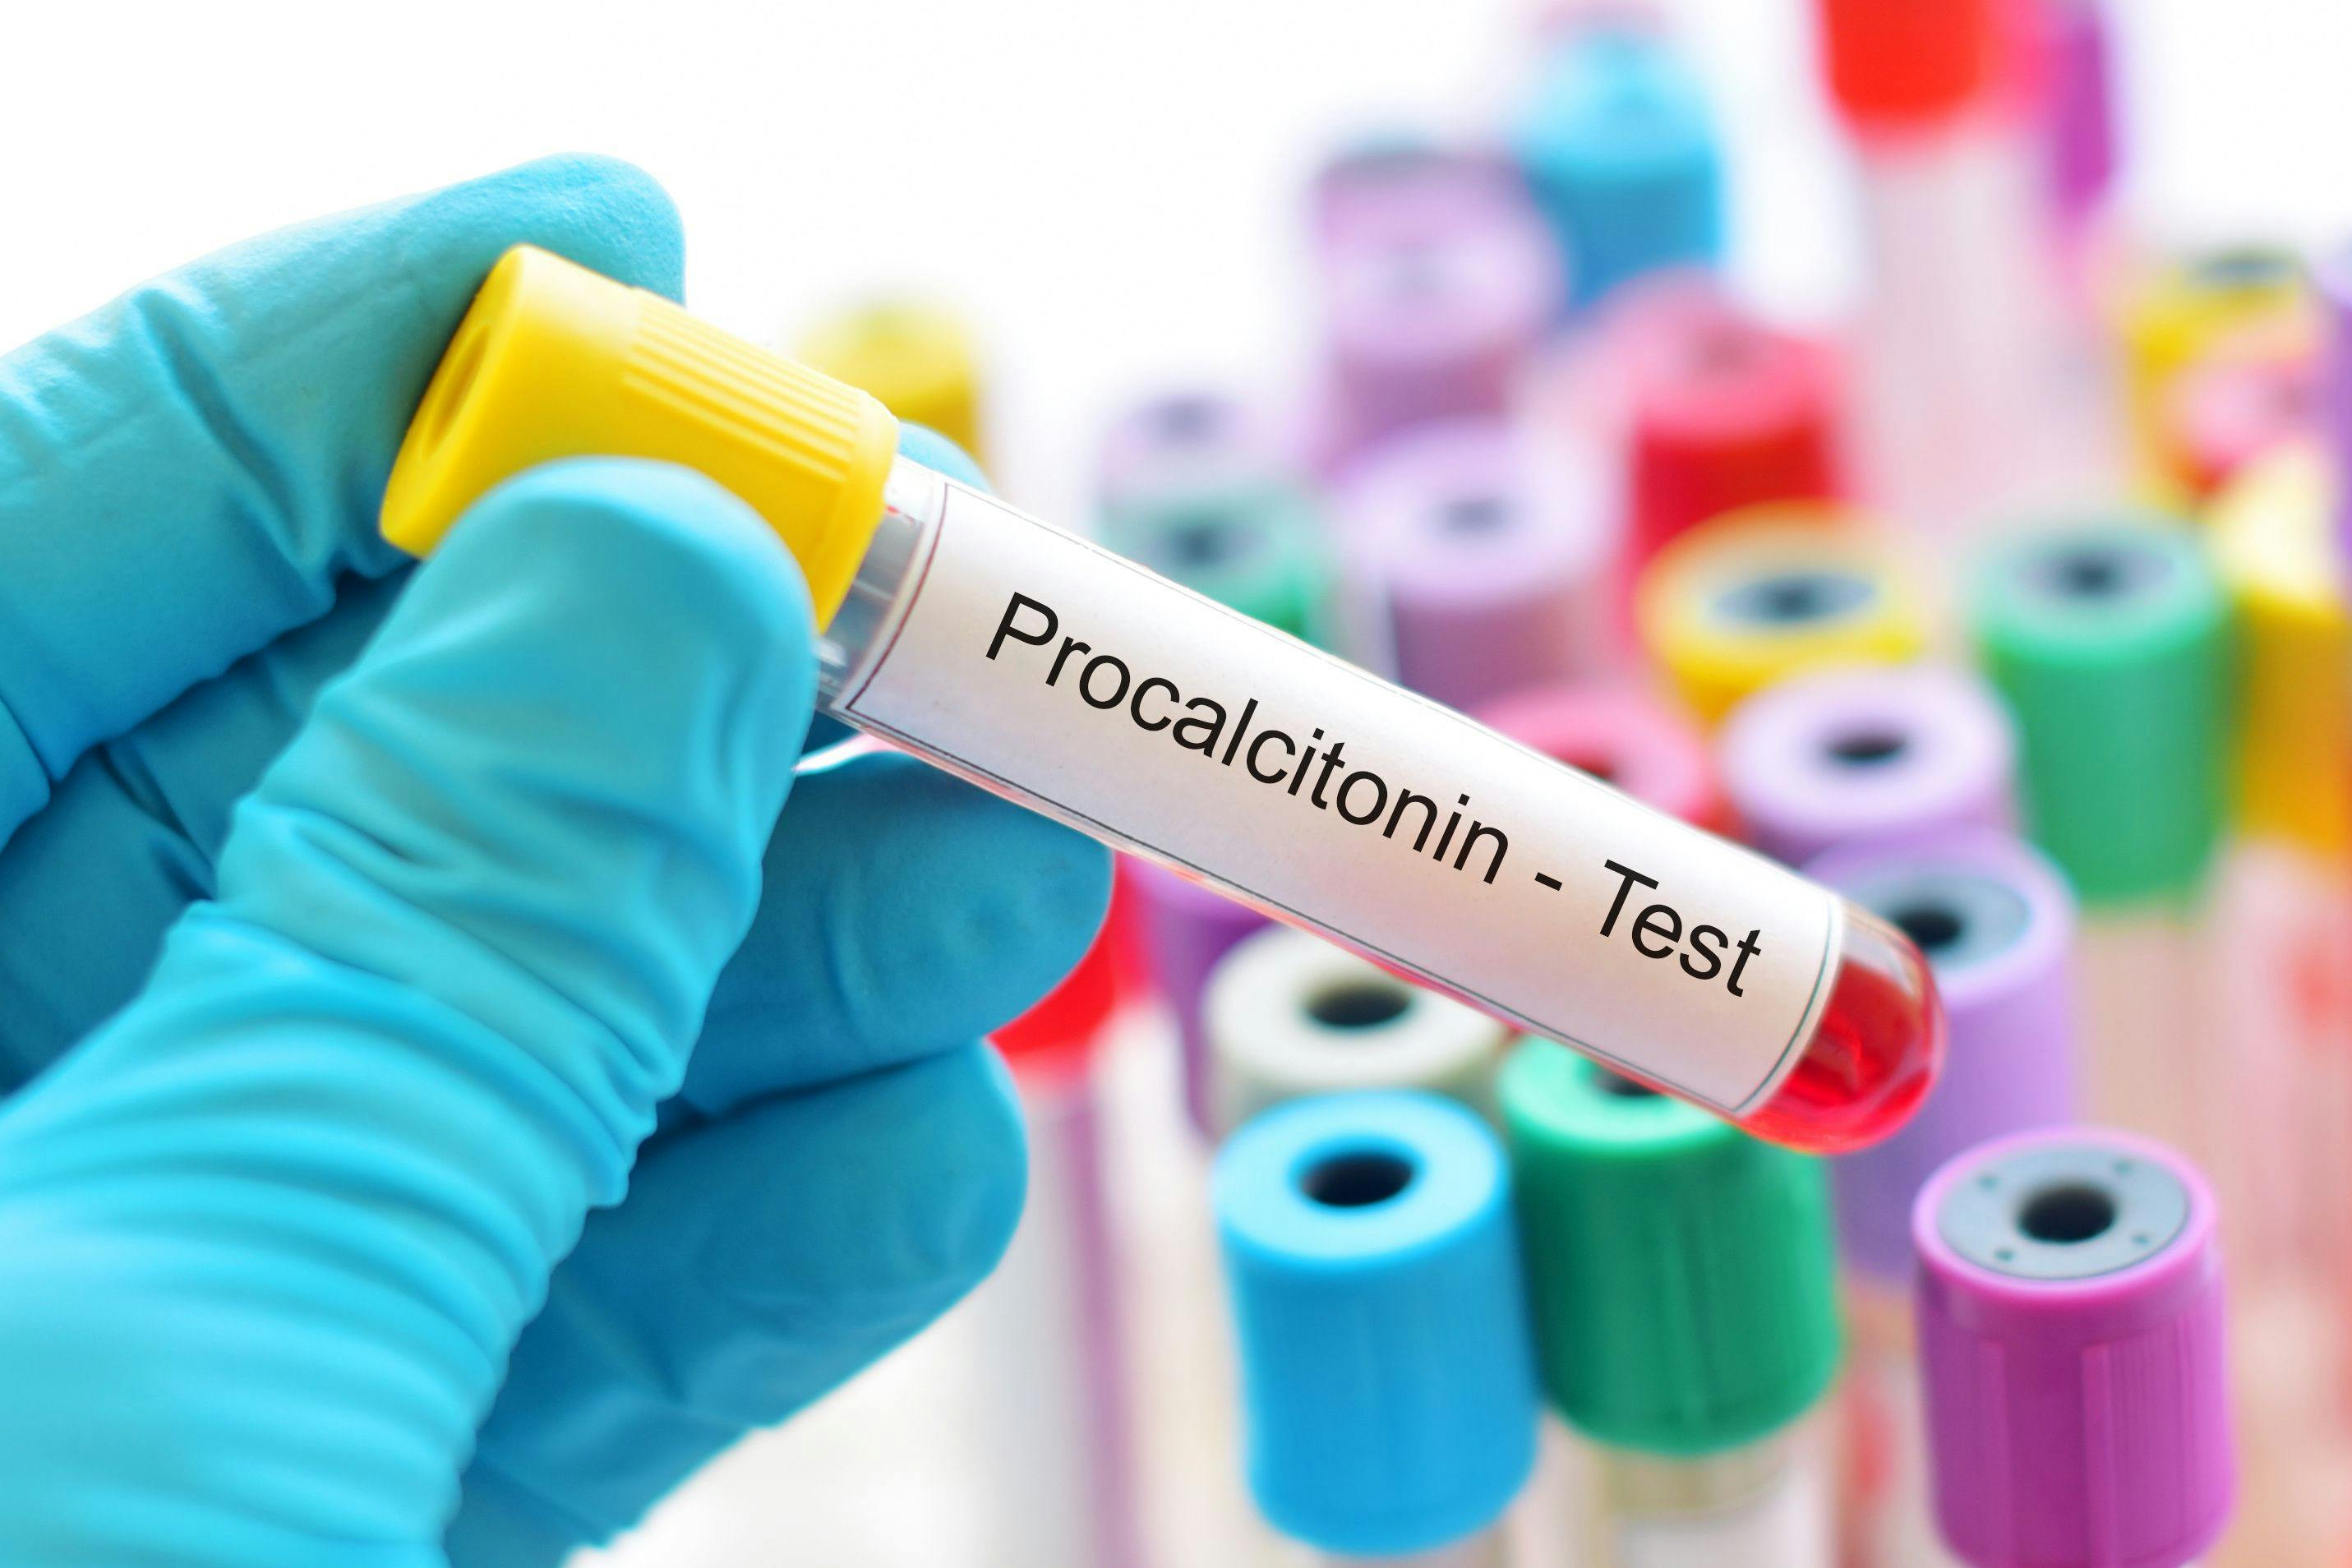 Investigators used procalcitonin (PCT) levels to guide antibiotic recommendations in pediatric intensive care units. PCT-guided antibiotic stewardship decreased the number of antibiotic days without leading to therapy failure.